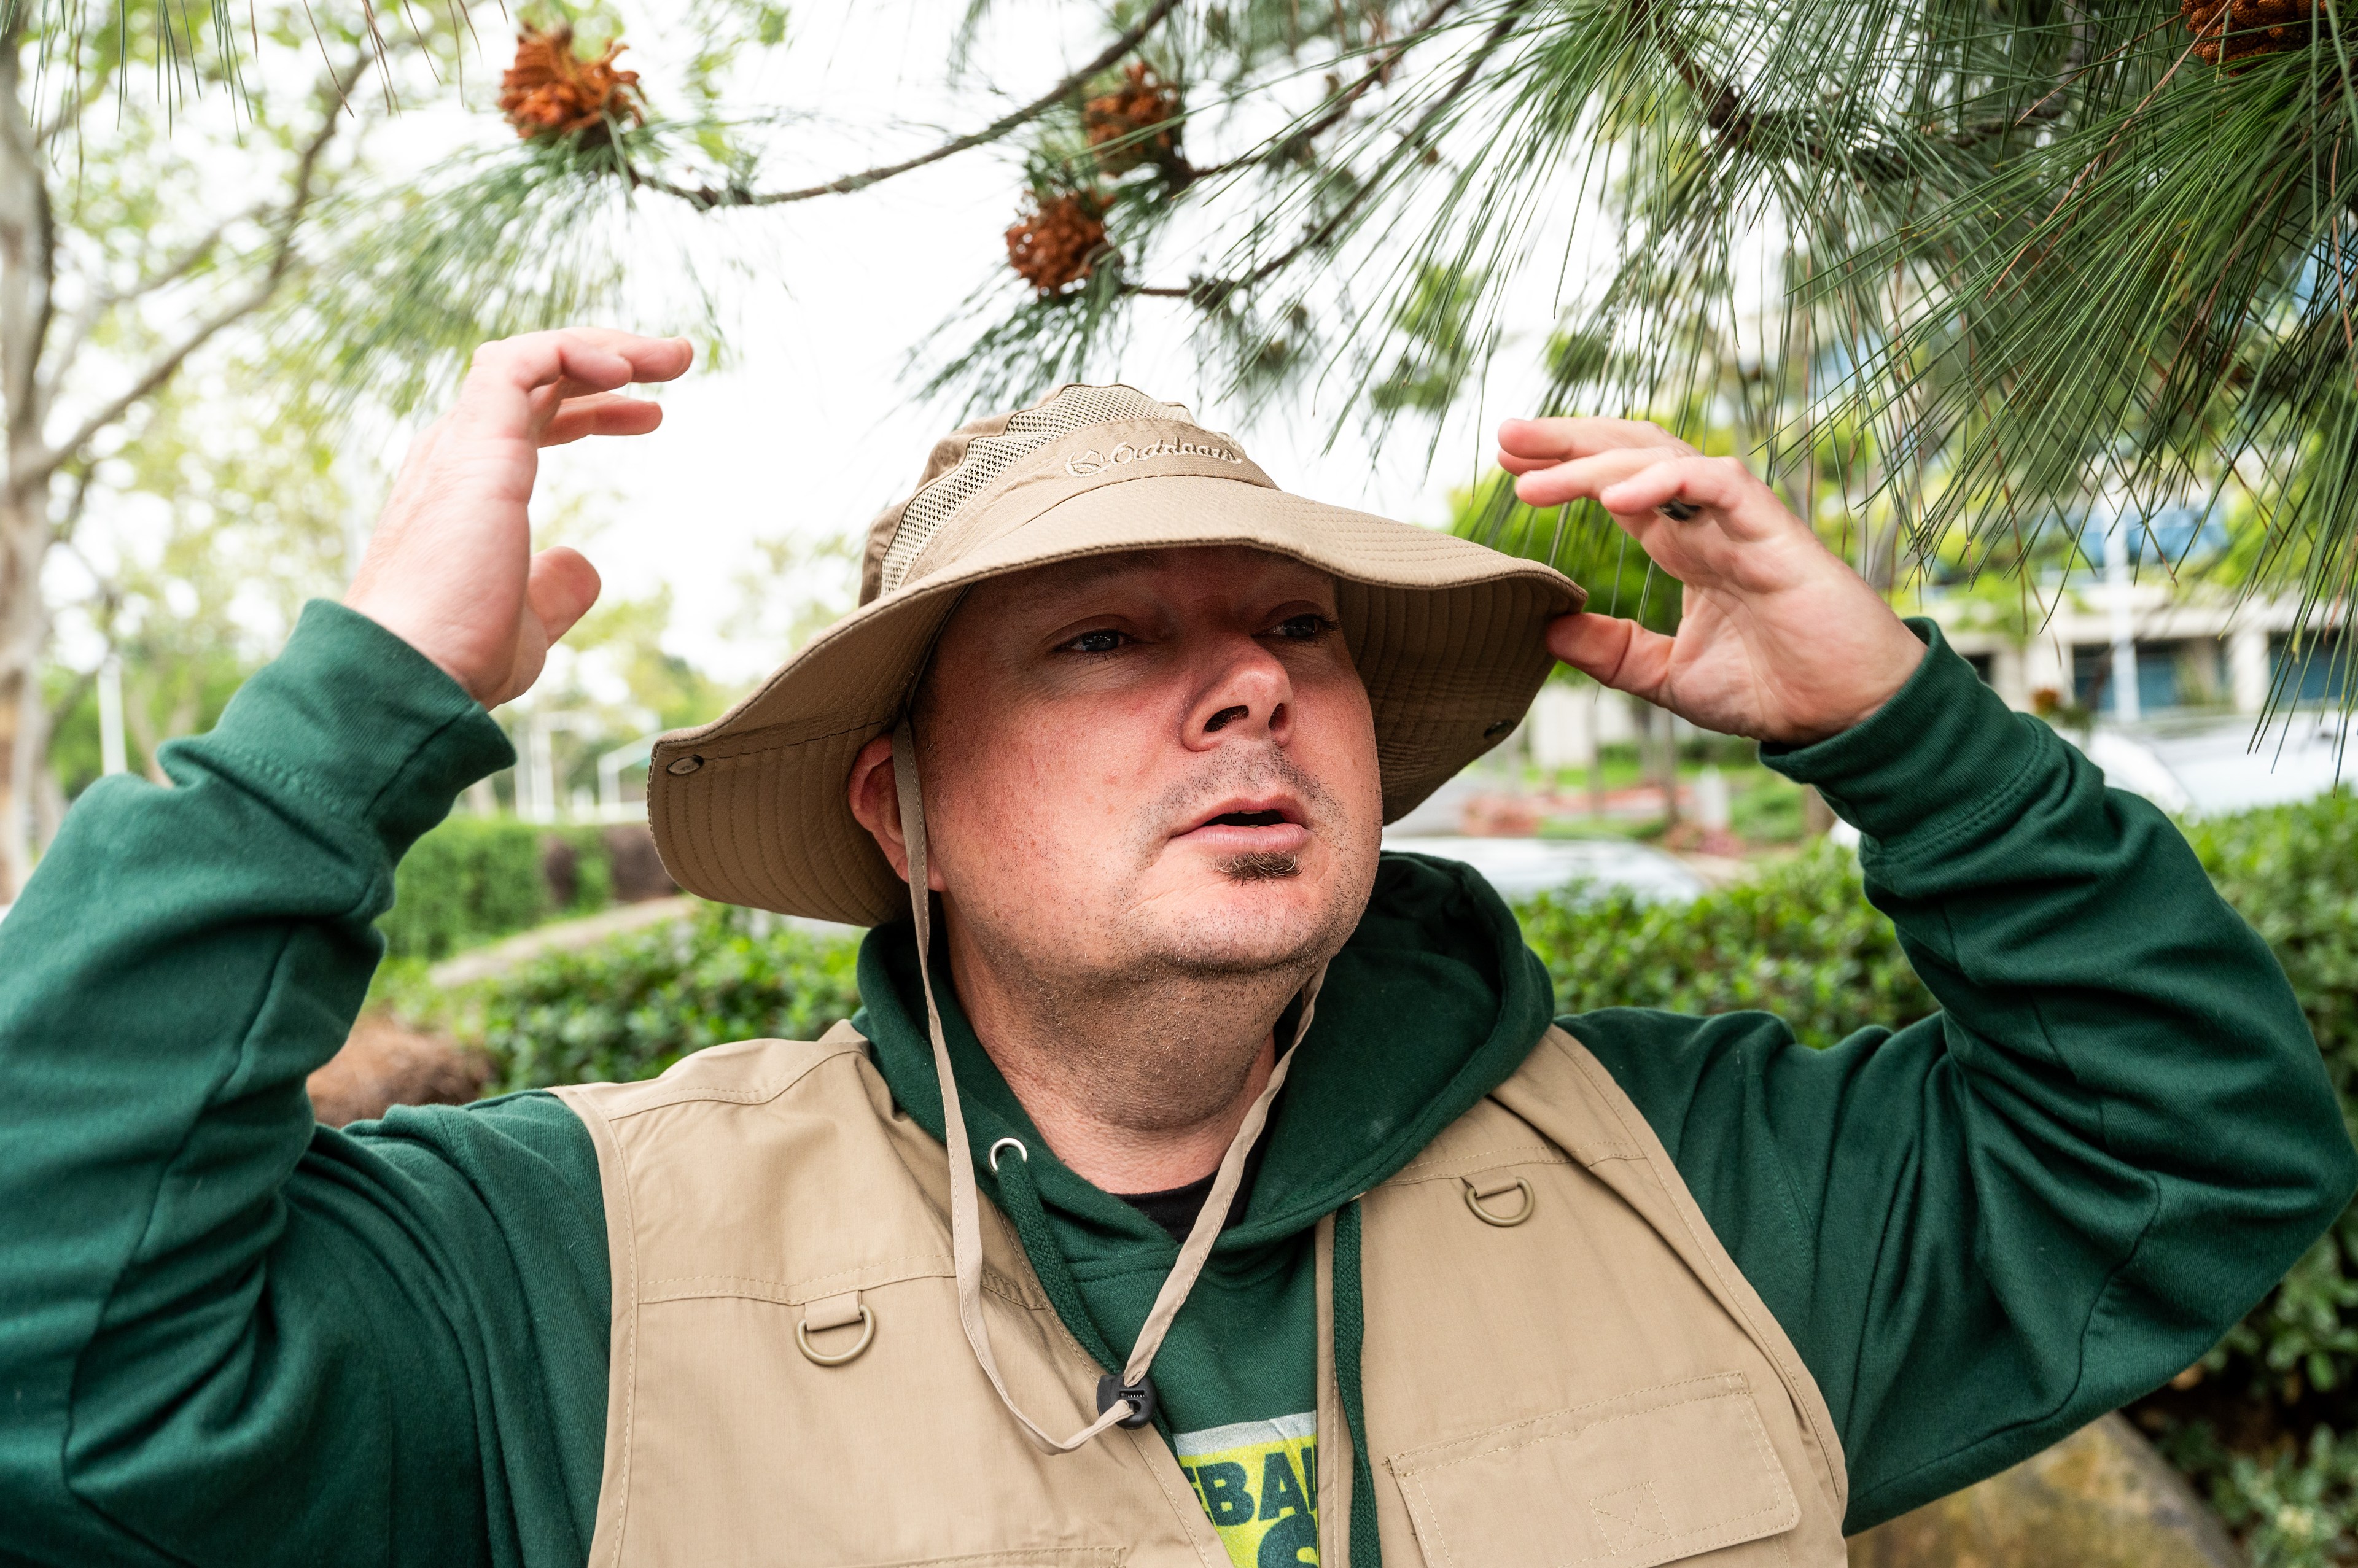 A man in a beige hat and green jacket looks up, touching the brim of his hat, with pine branches above.